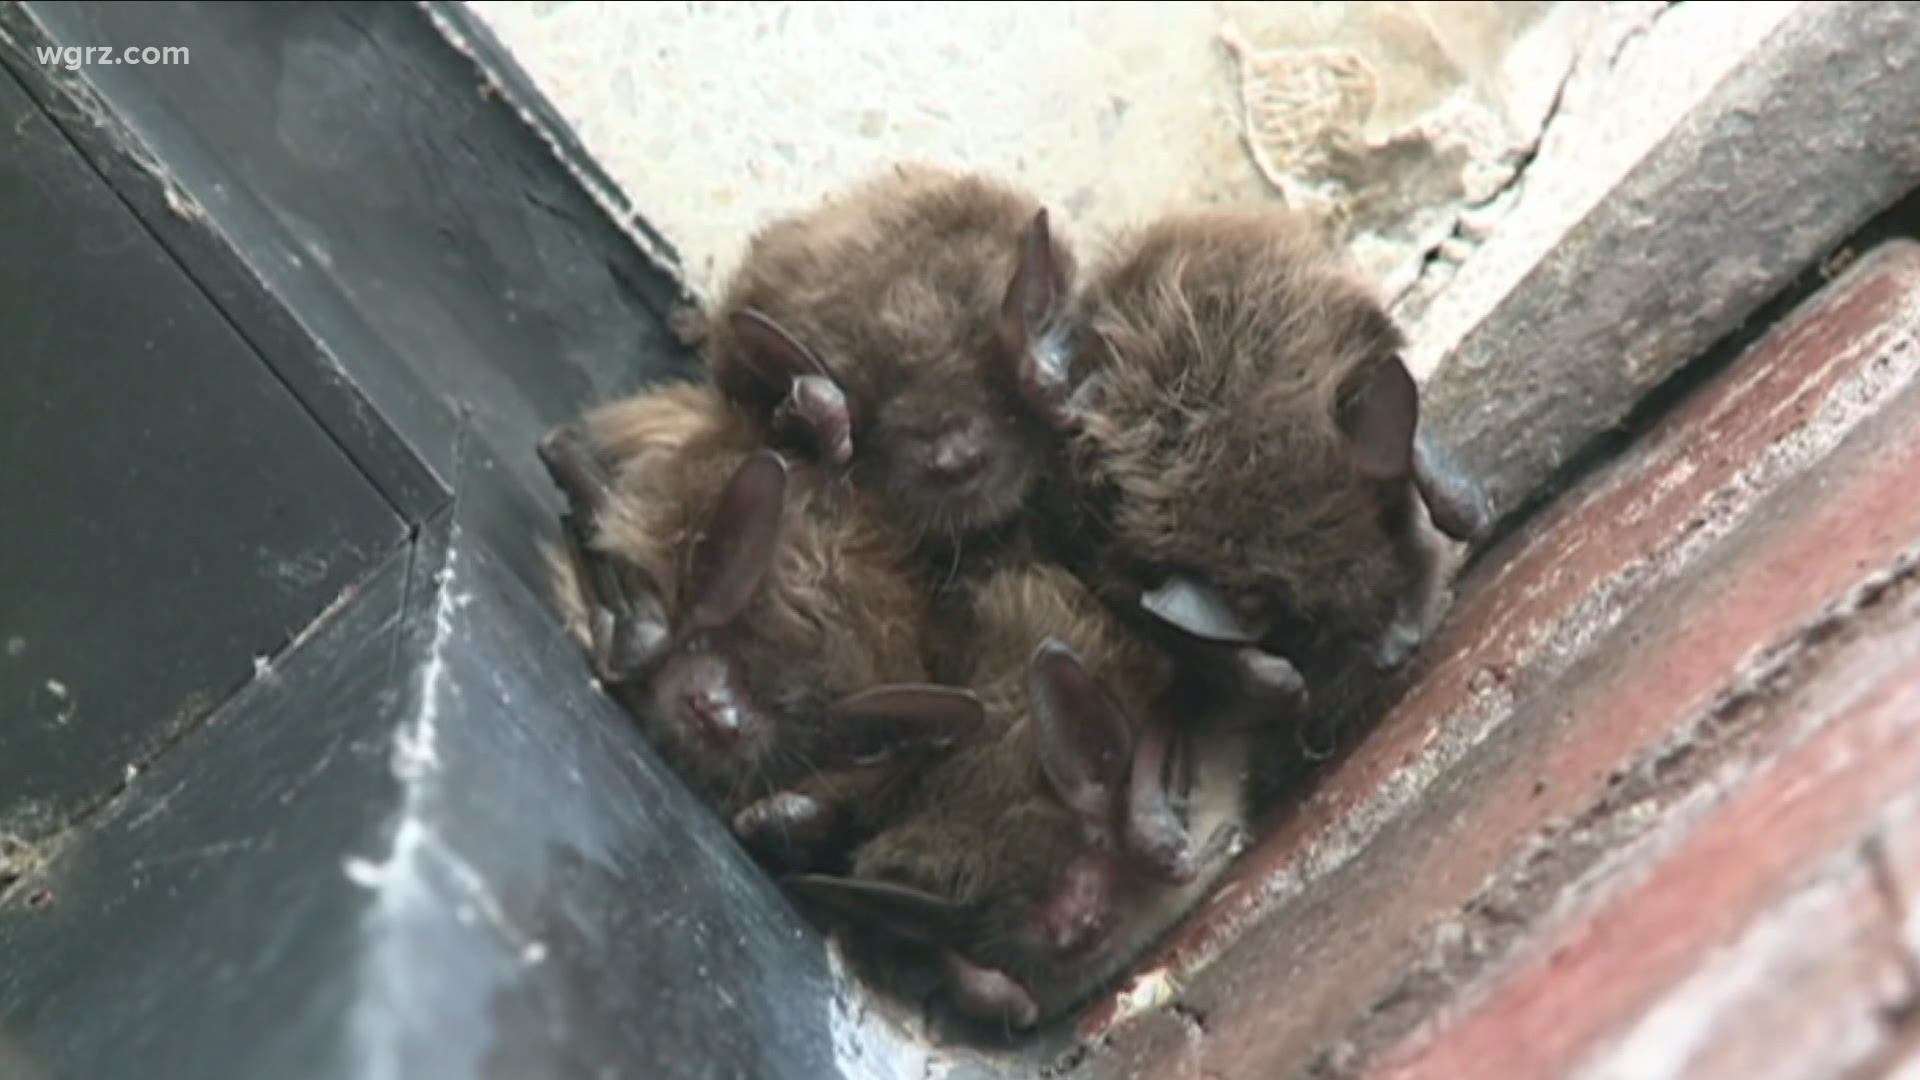 White-nose syndrome has devastated bat populations across North America.